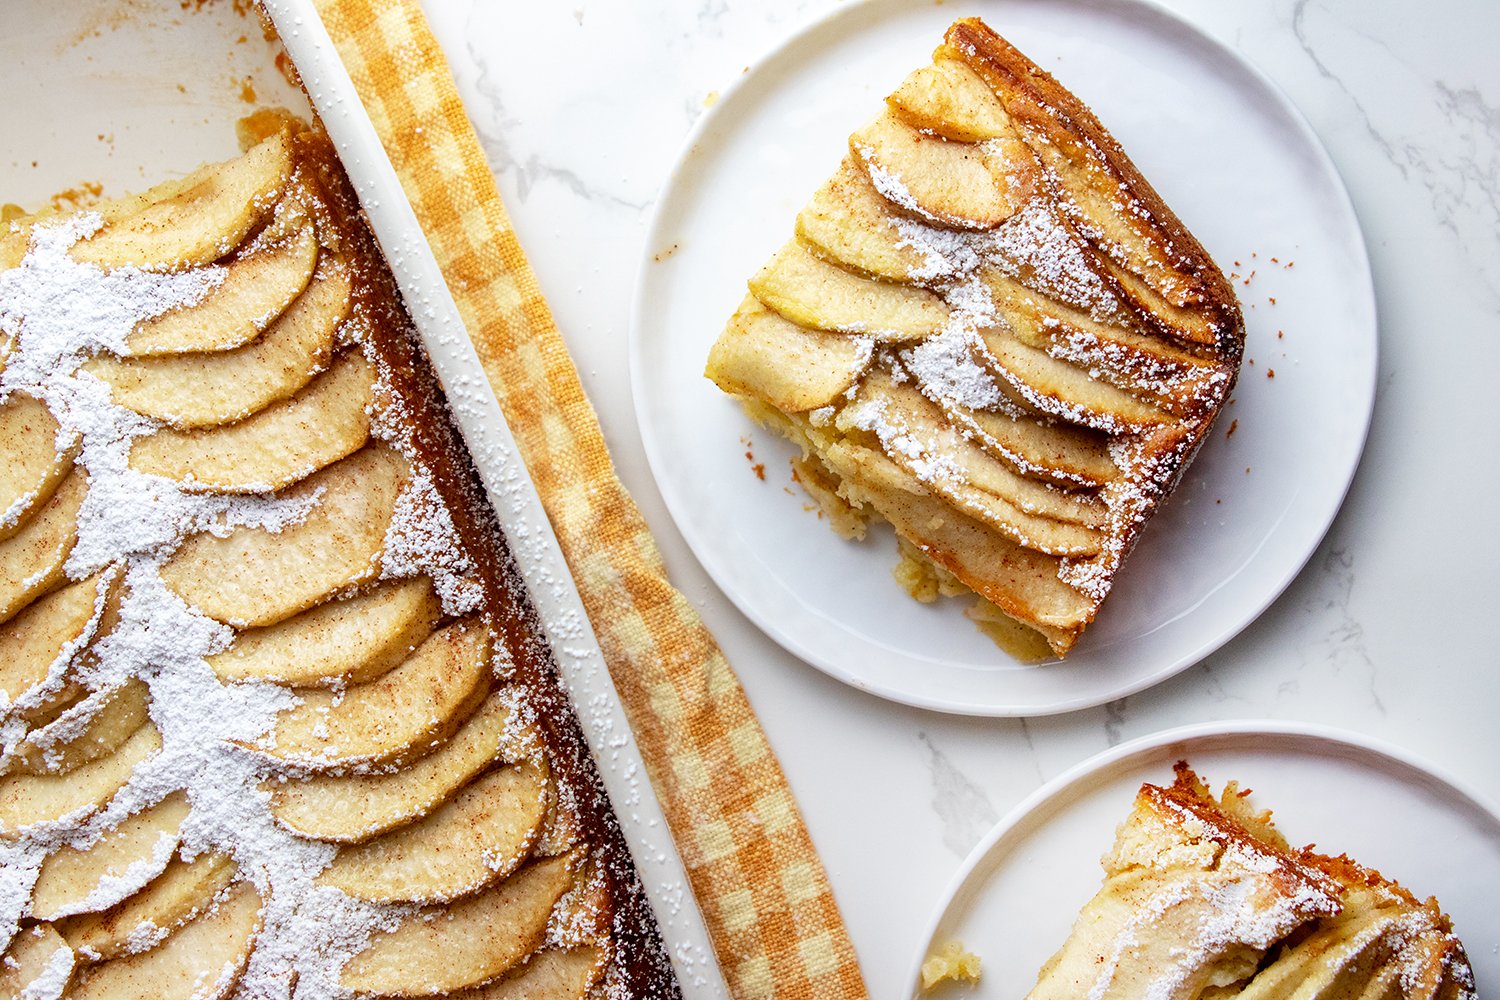 ottolenghi apple and olive oil cake with maple icing — eat the right stuff